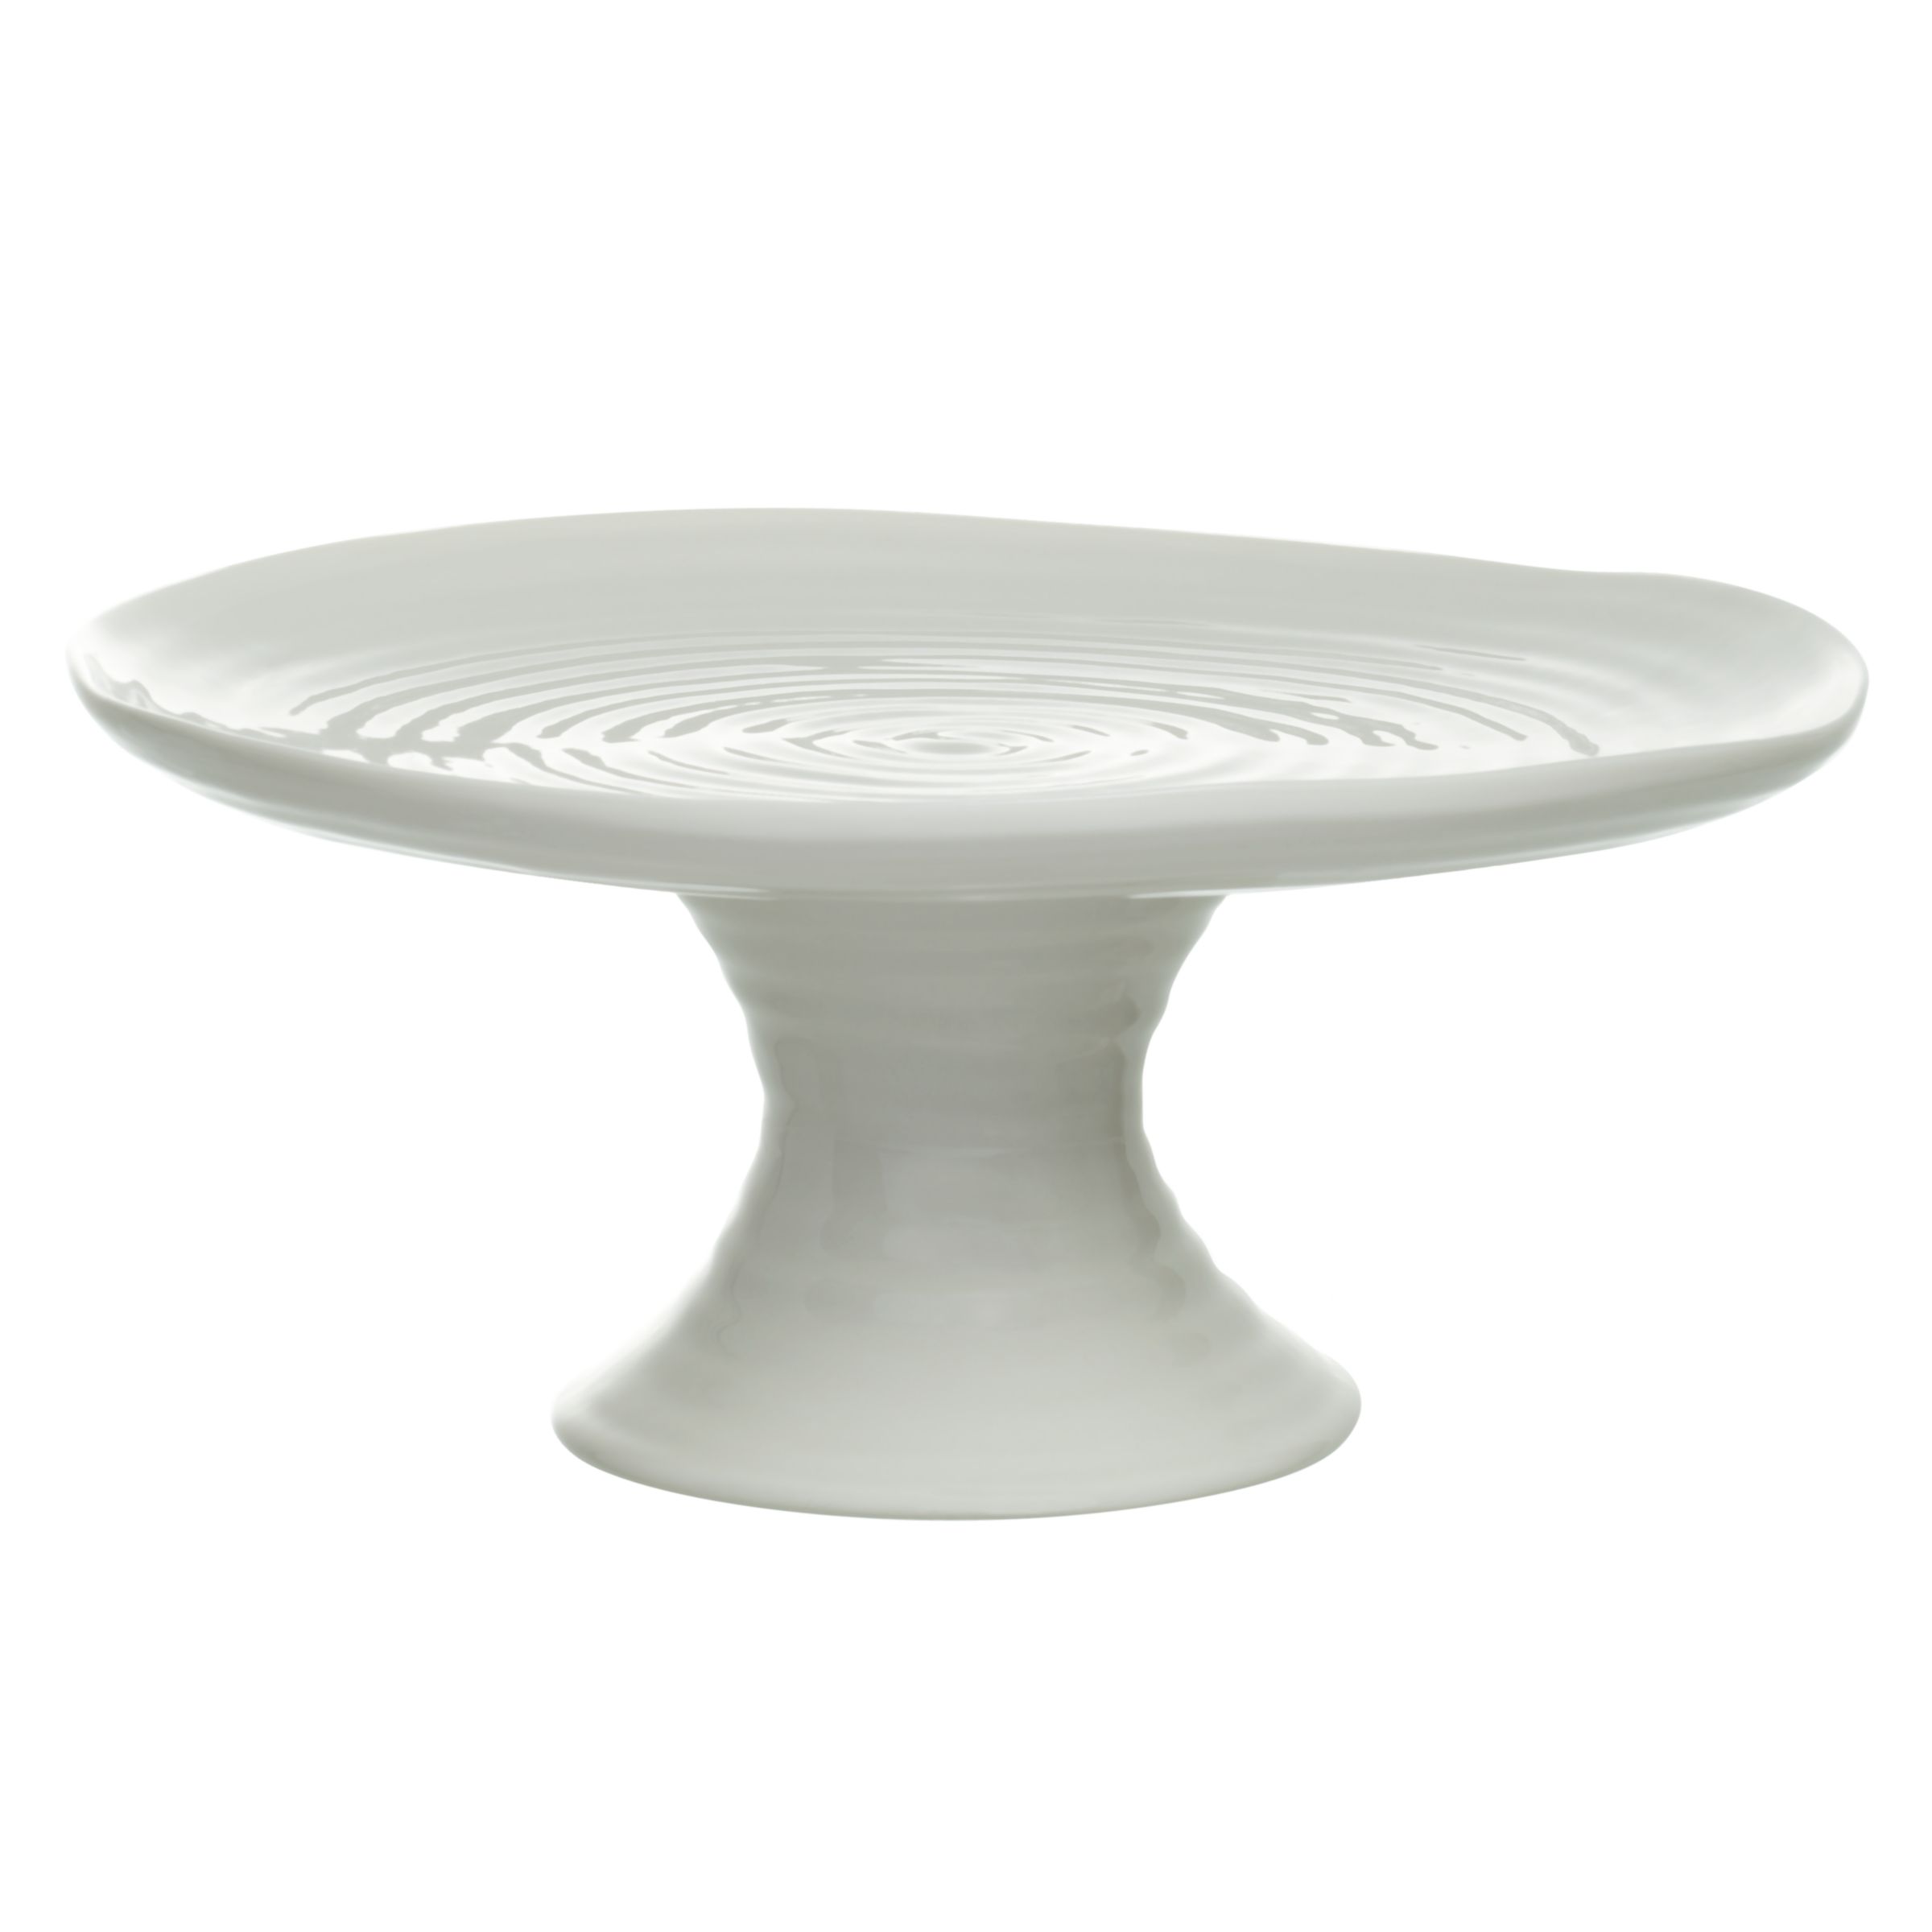 Sophie Conran for Portmeirion Footed Cake  Plate White 